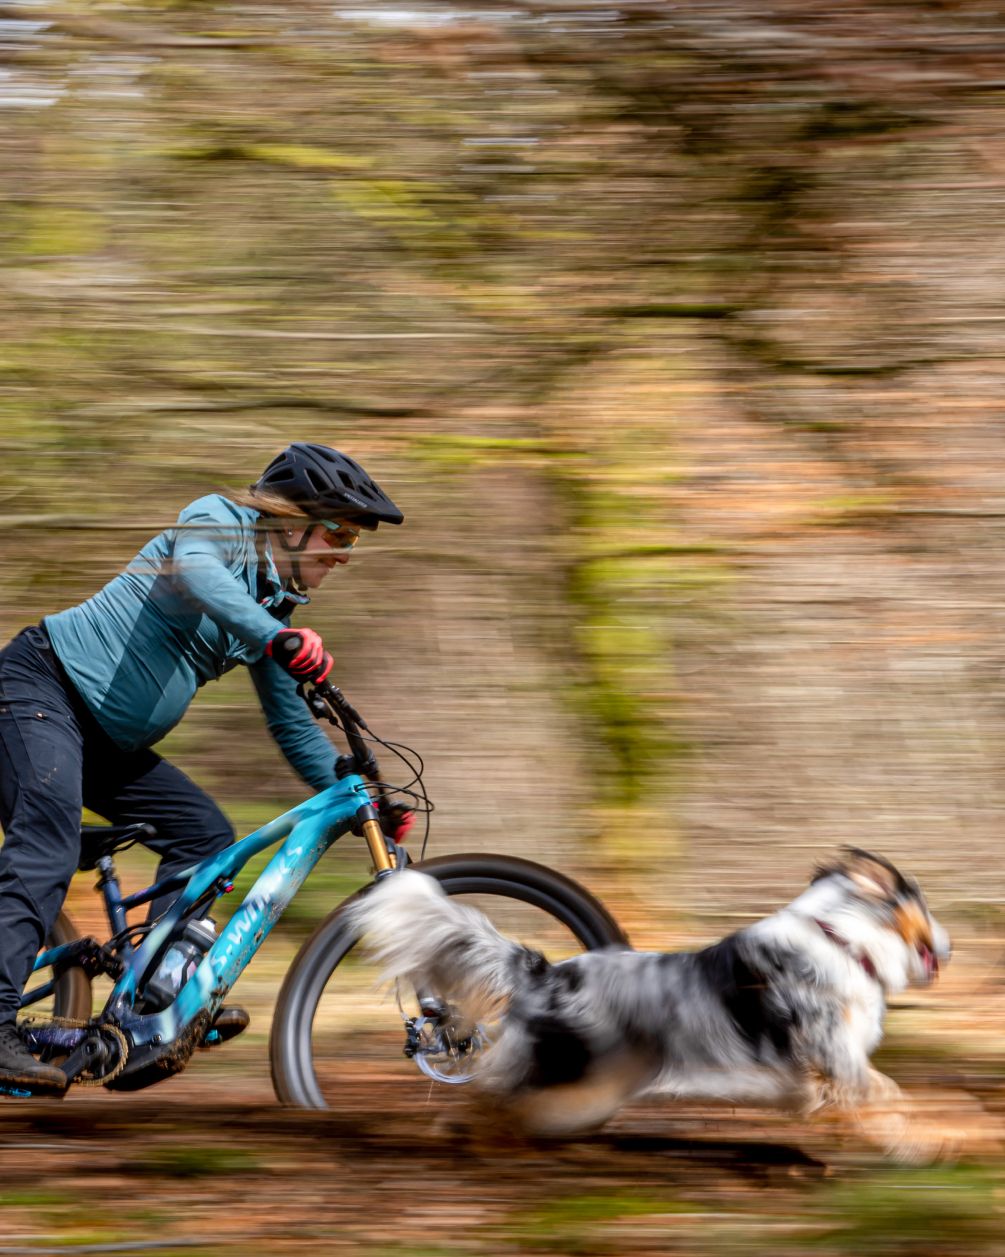 A woman biking fast on a mountainbike and a dog running beside her